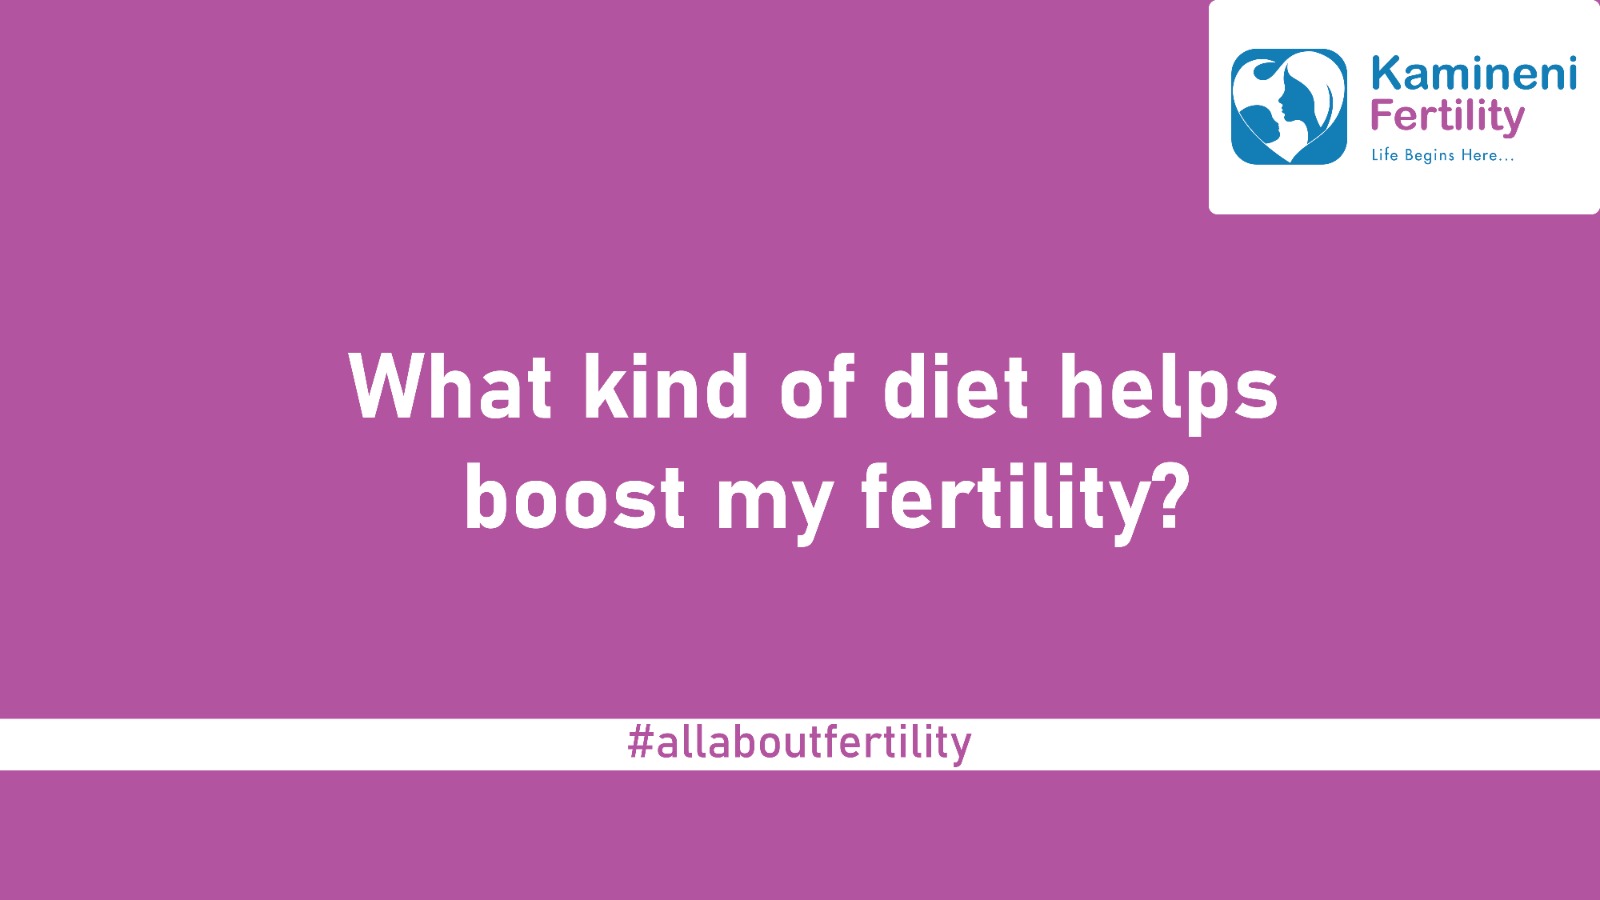 What kind of diet helps boost my fertility?